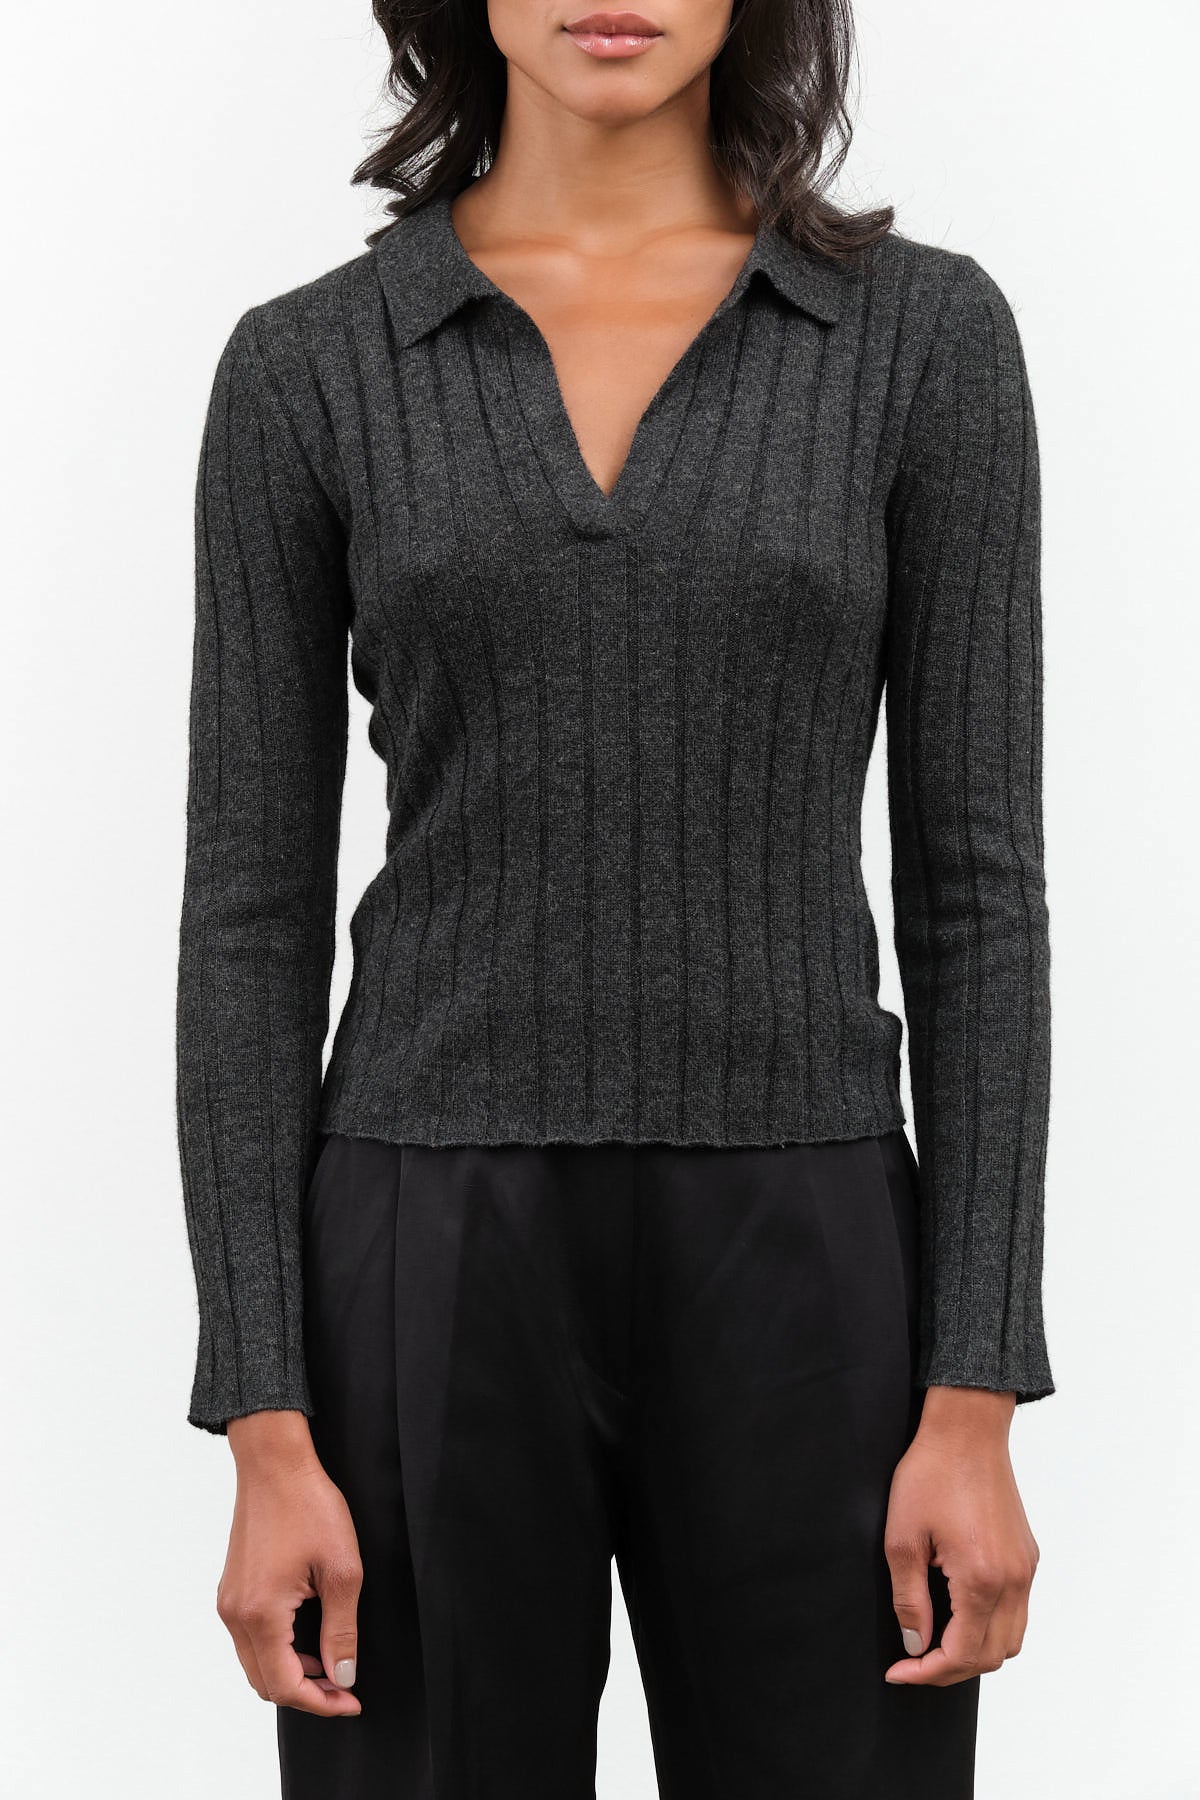 Yak V-Neck Long Sleeve Top by 7115 by Szeki in Charcoal